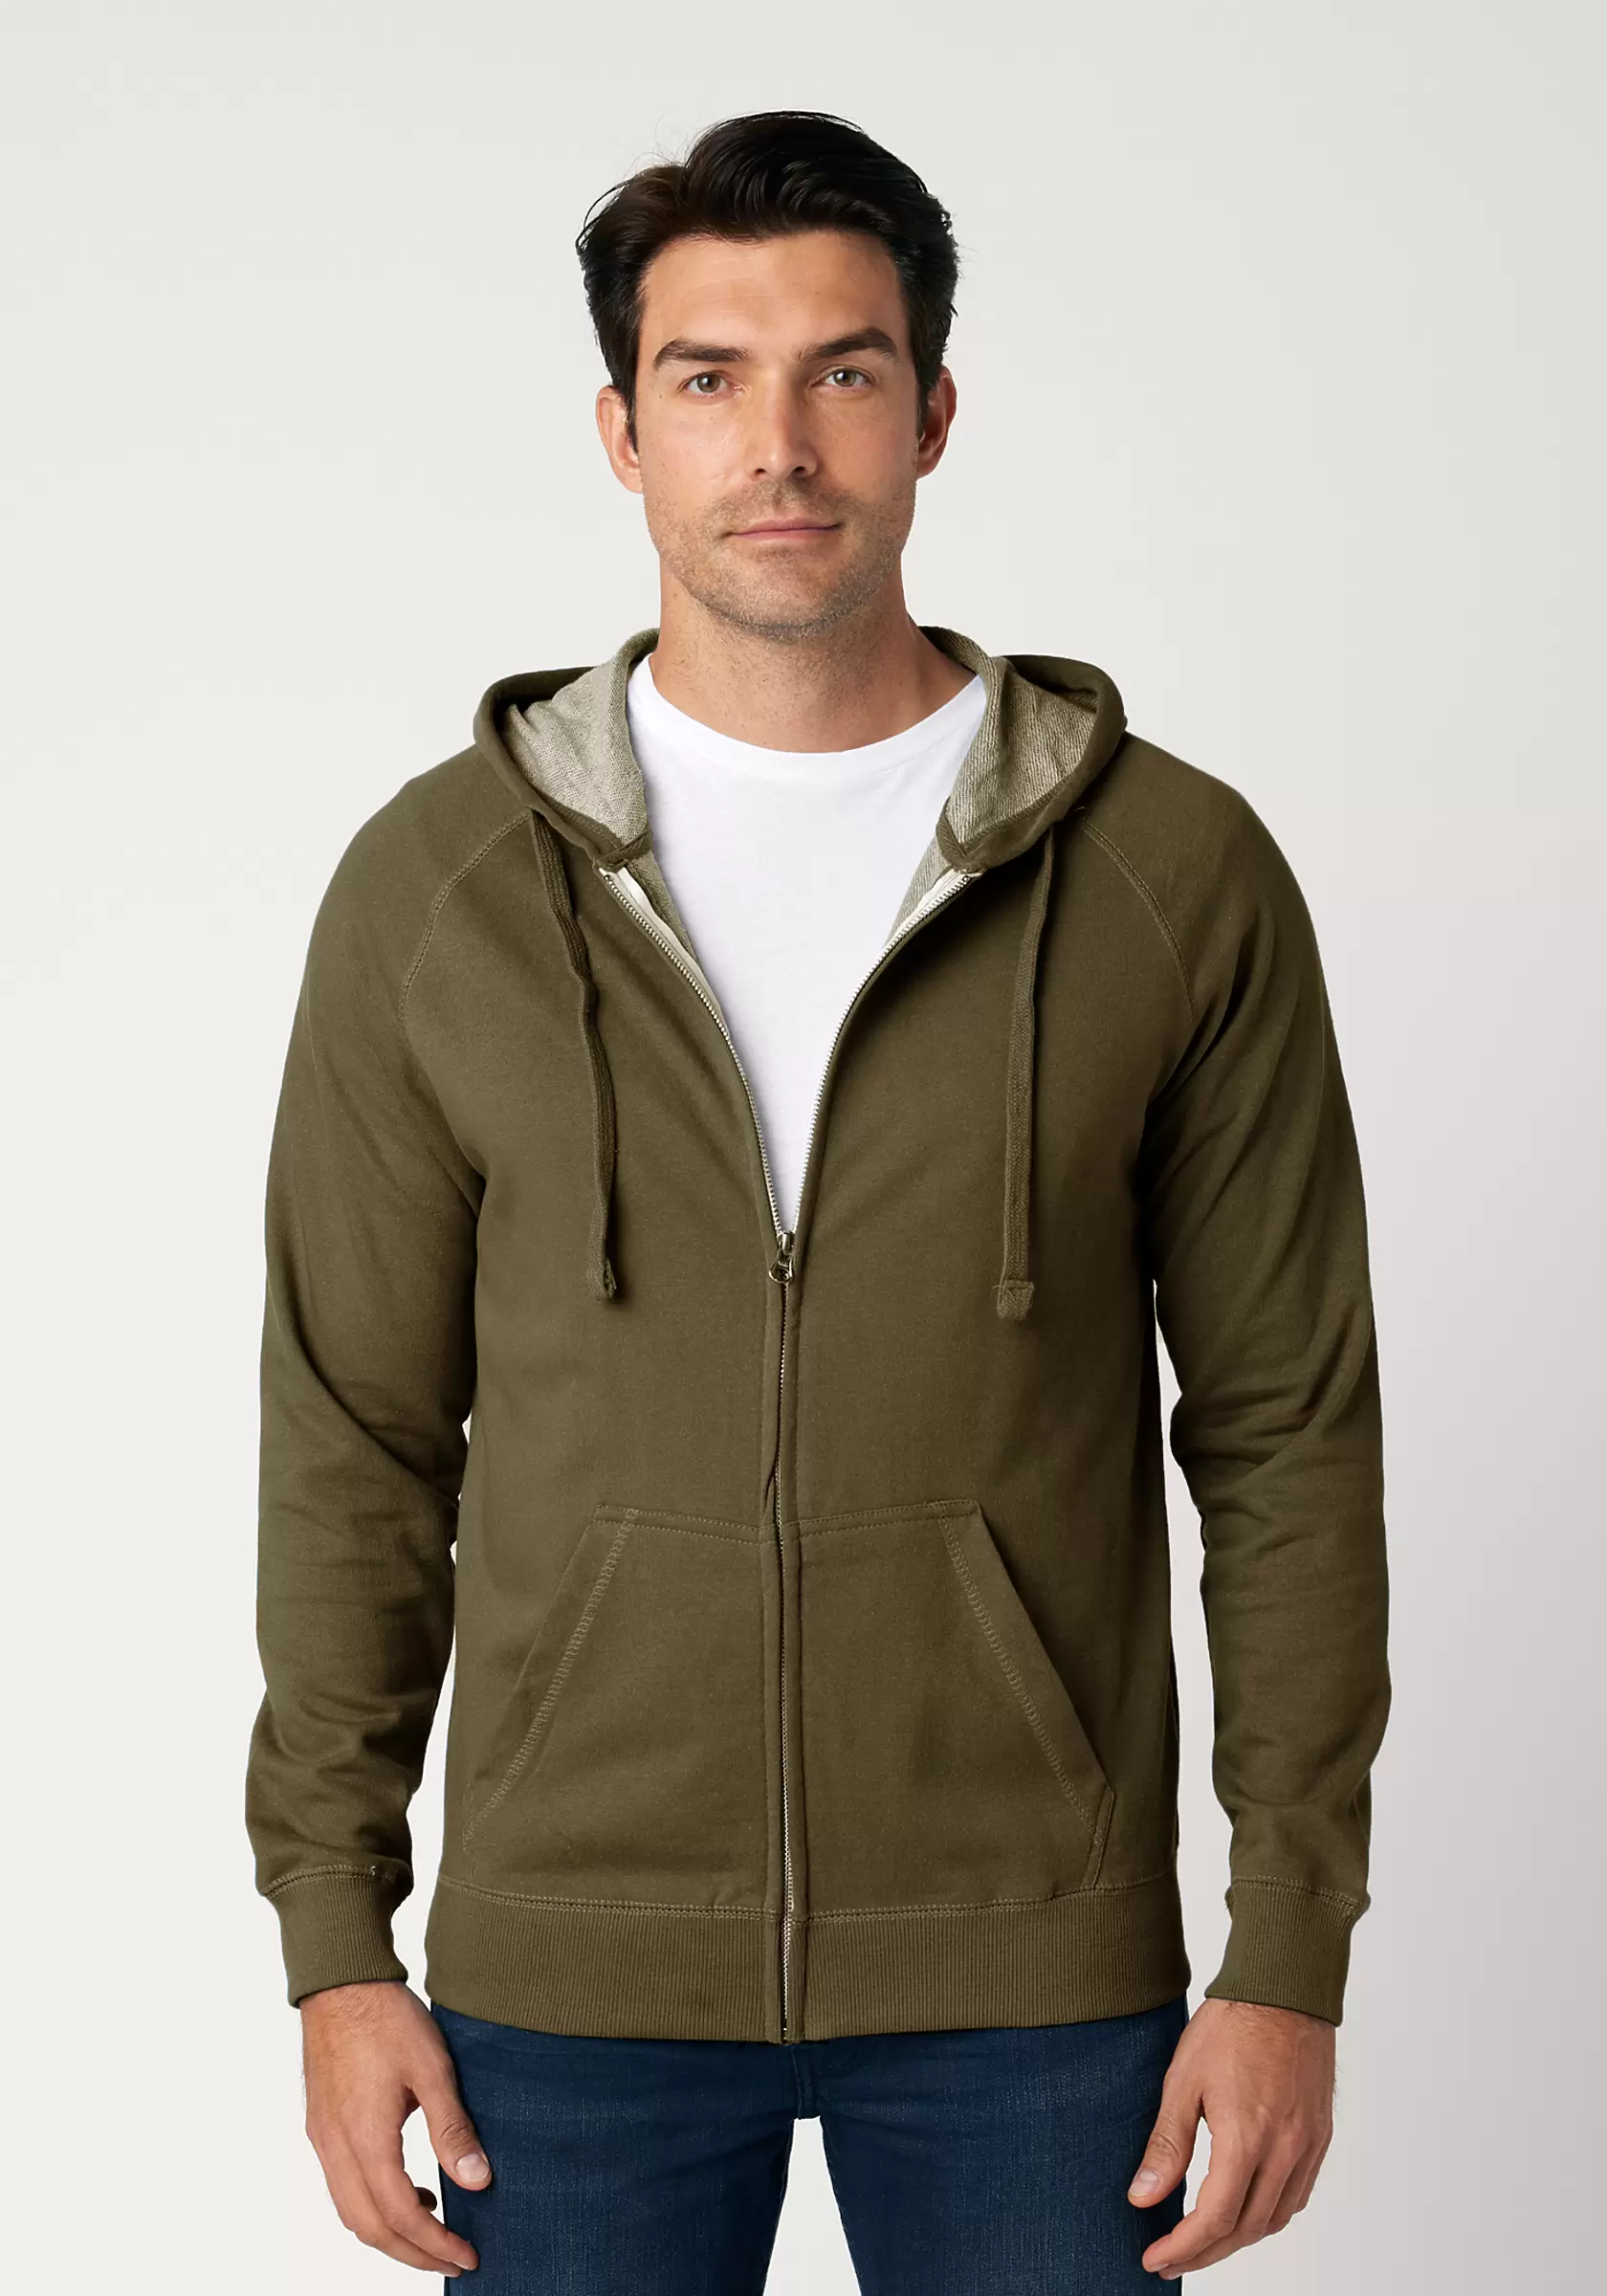 Cotton Full Sleeves Plain Hoodie at Rs 575/piece in Hyderabad